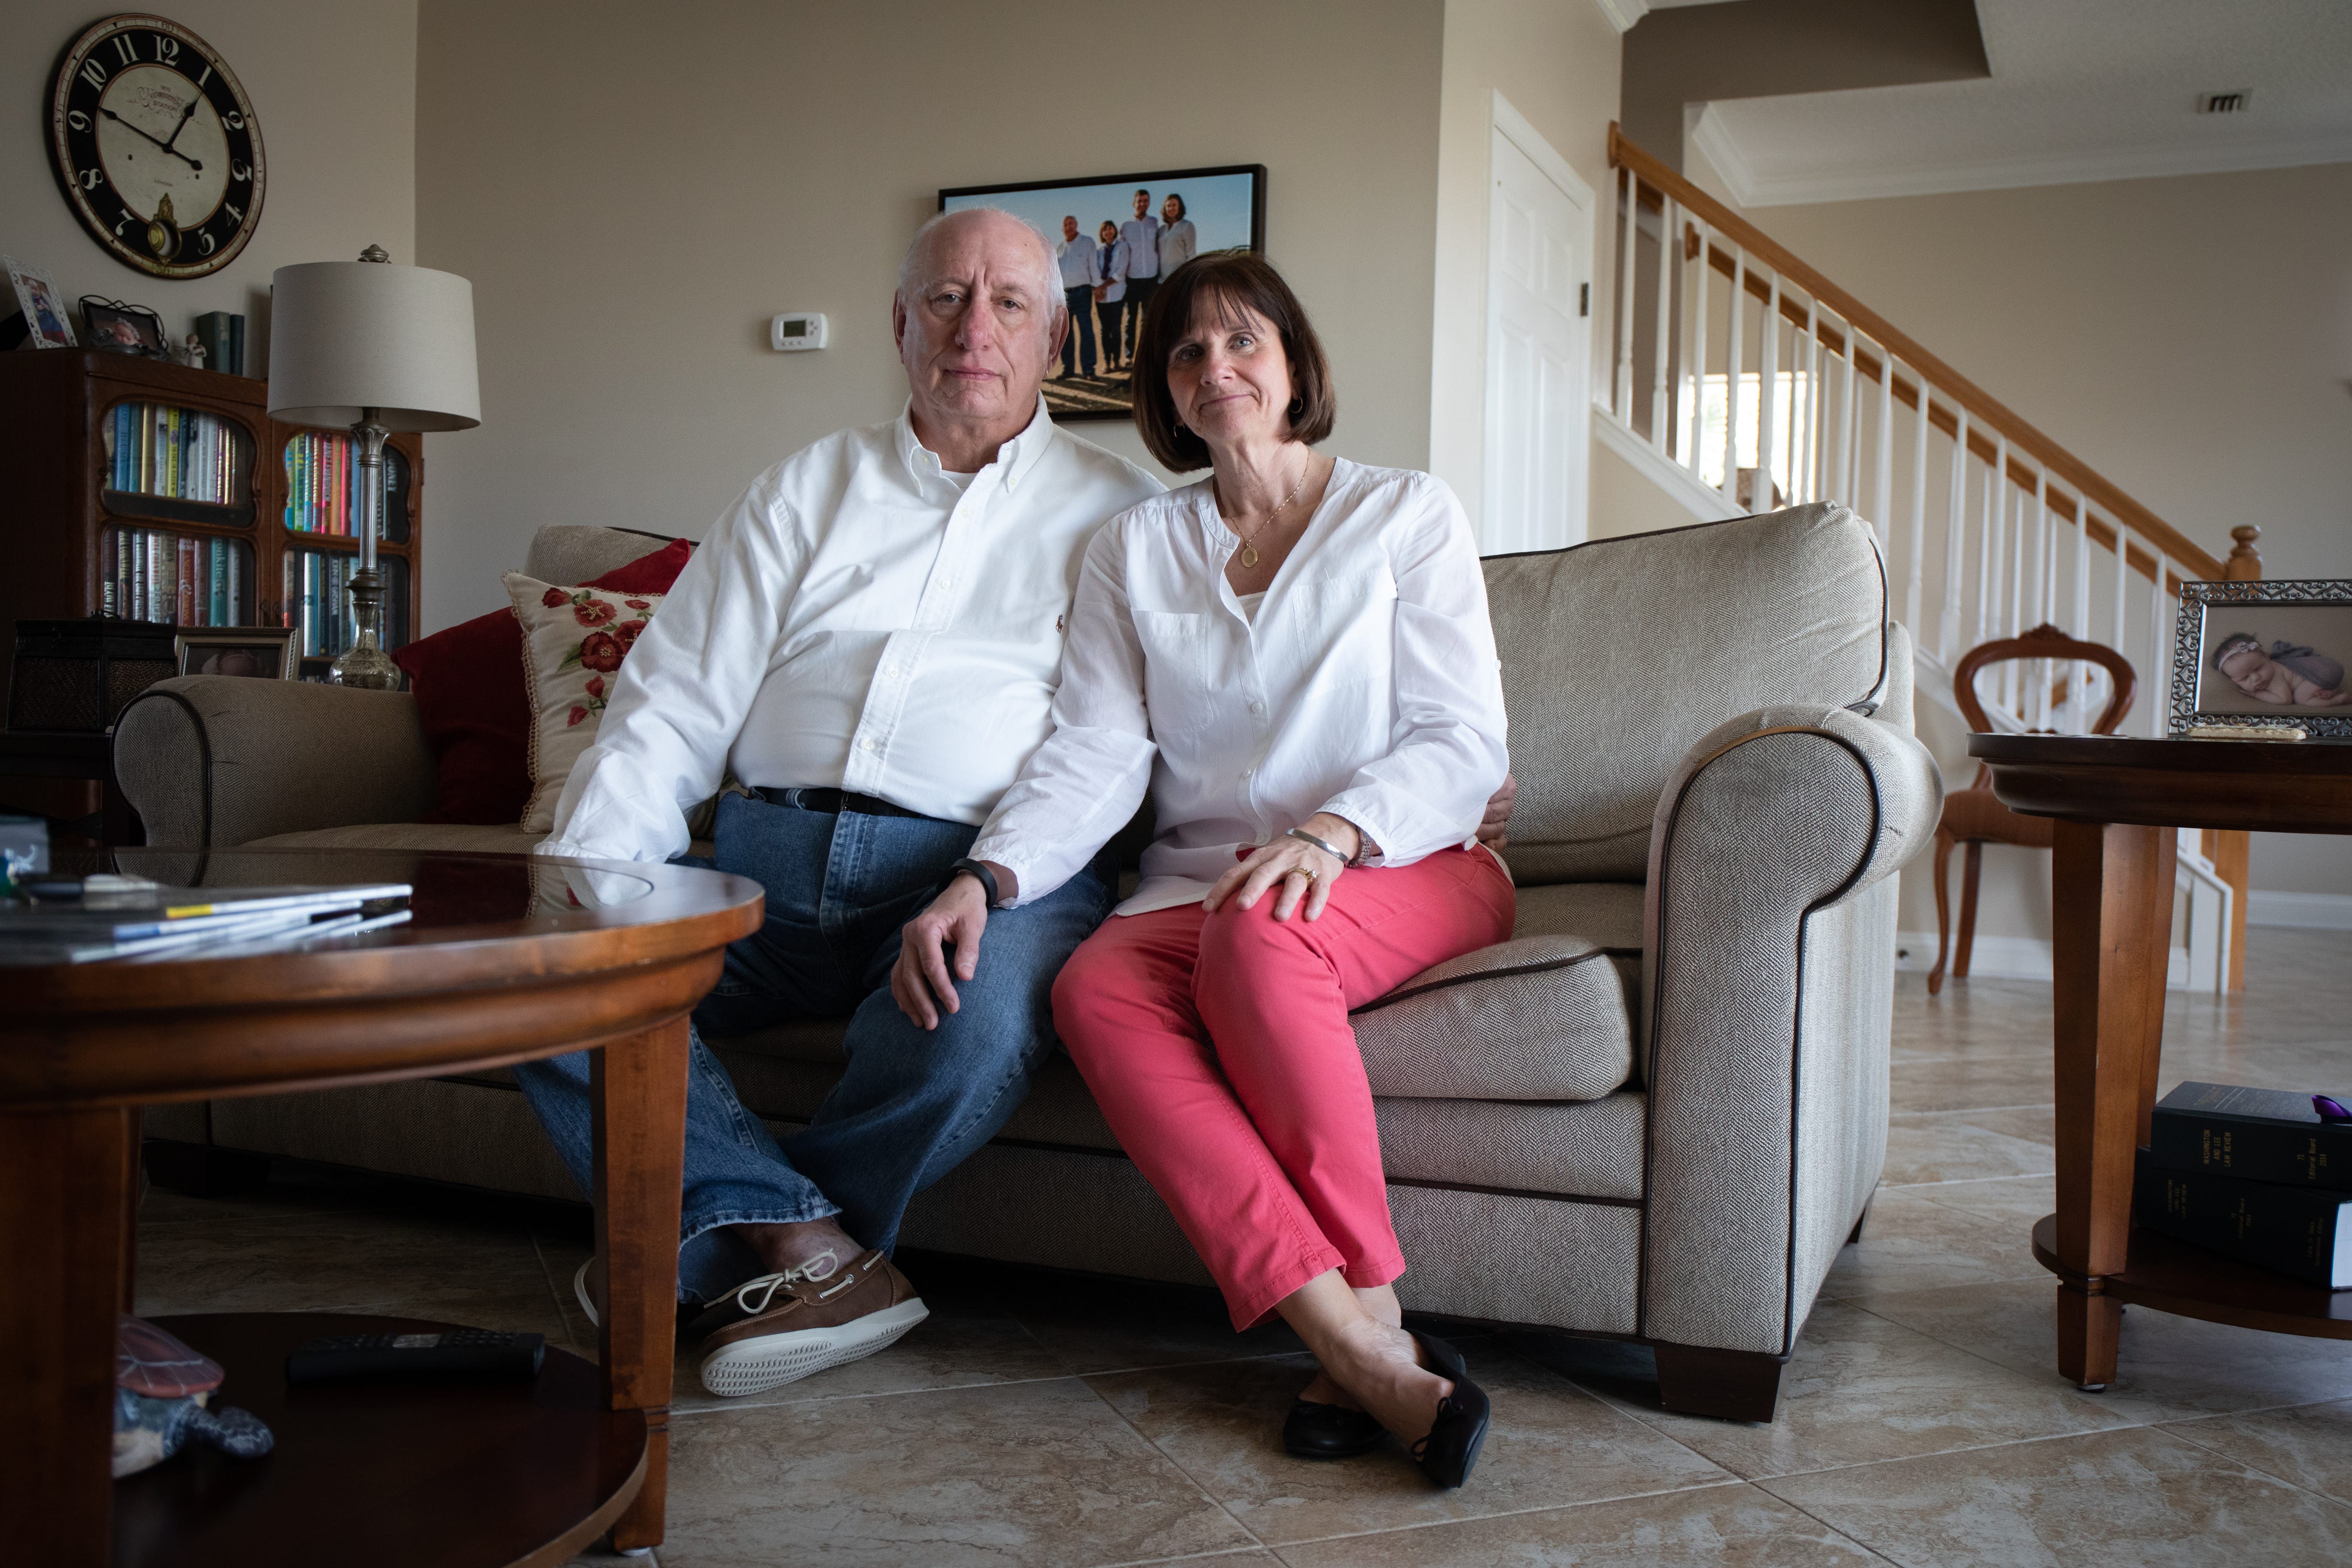 Jay and Gerri Gass, on the fifth anniversary of their daughter's death, pose for a portrait in their home in Ponte Vedra Beach, Fla. on March 18, 2019. Lara Gass died at age 27 in 2014 in a car crash caused by a faulty ignition switch.